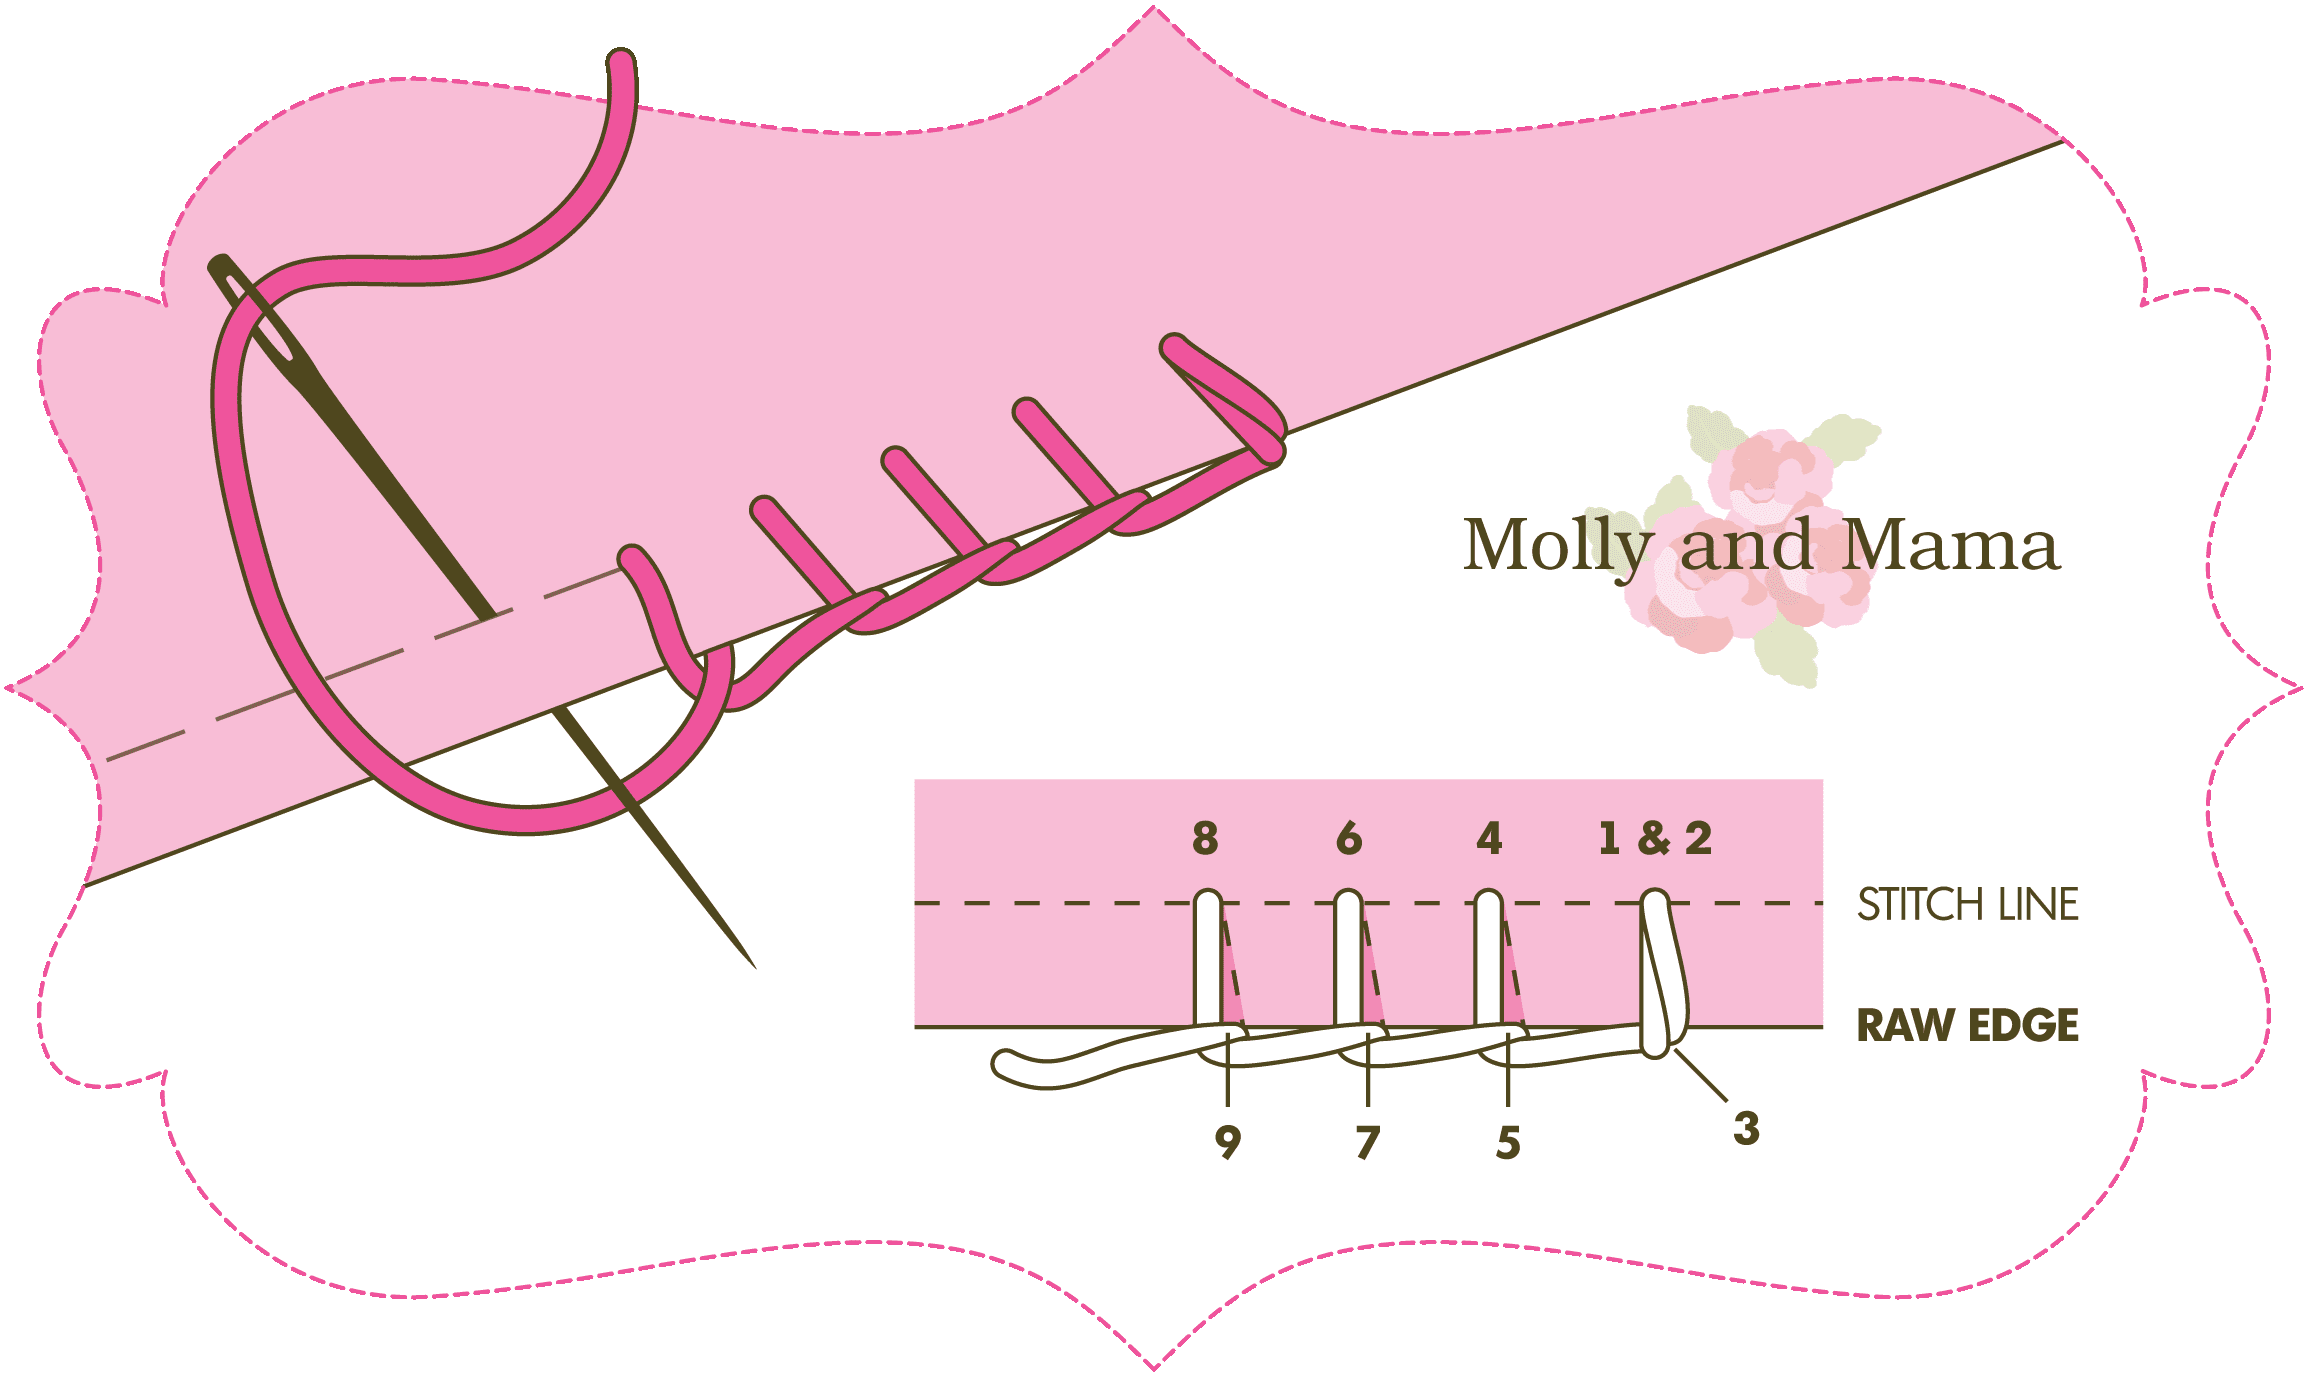 Molly and Mama blanket stitch illustration